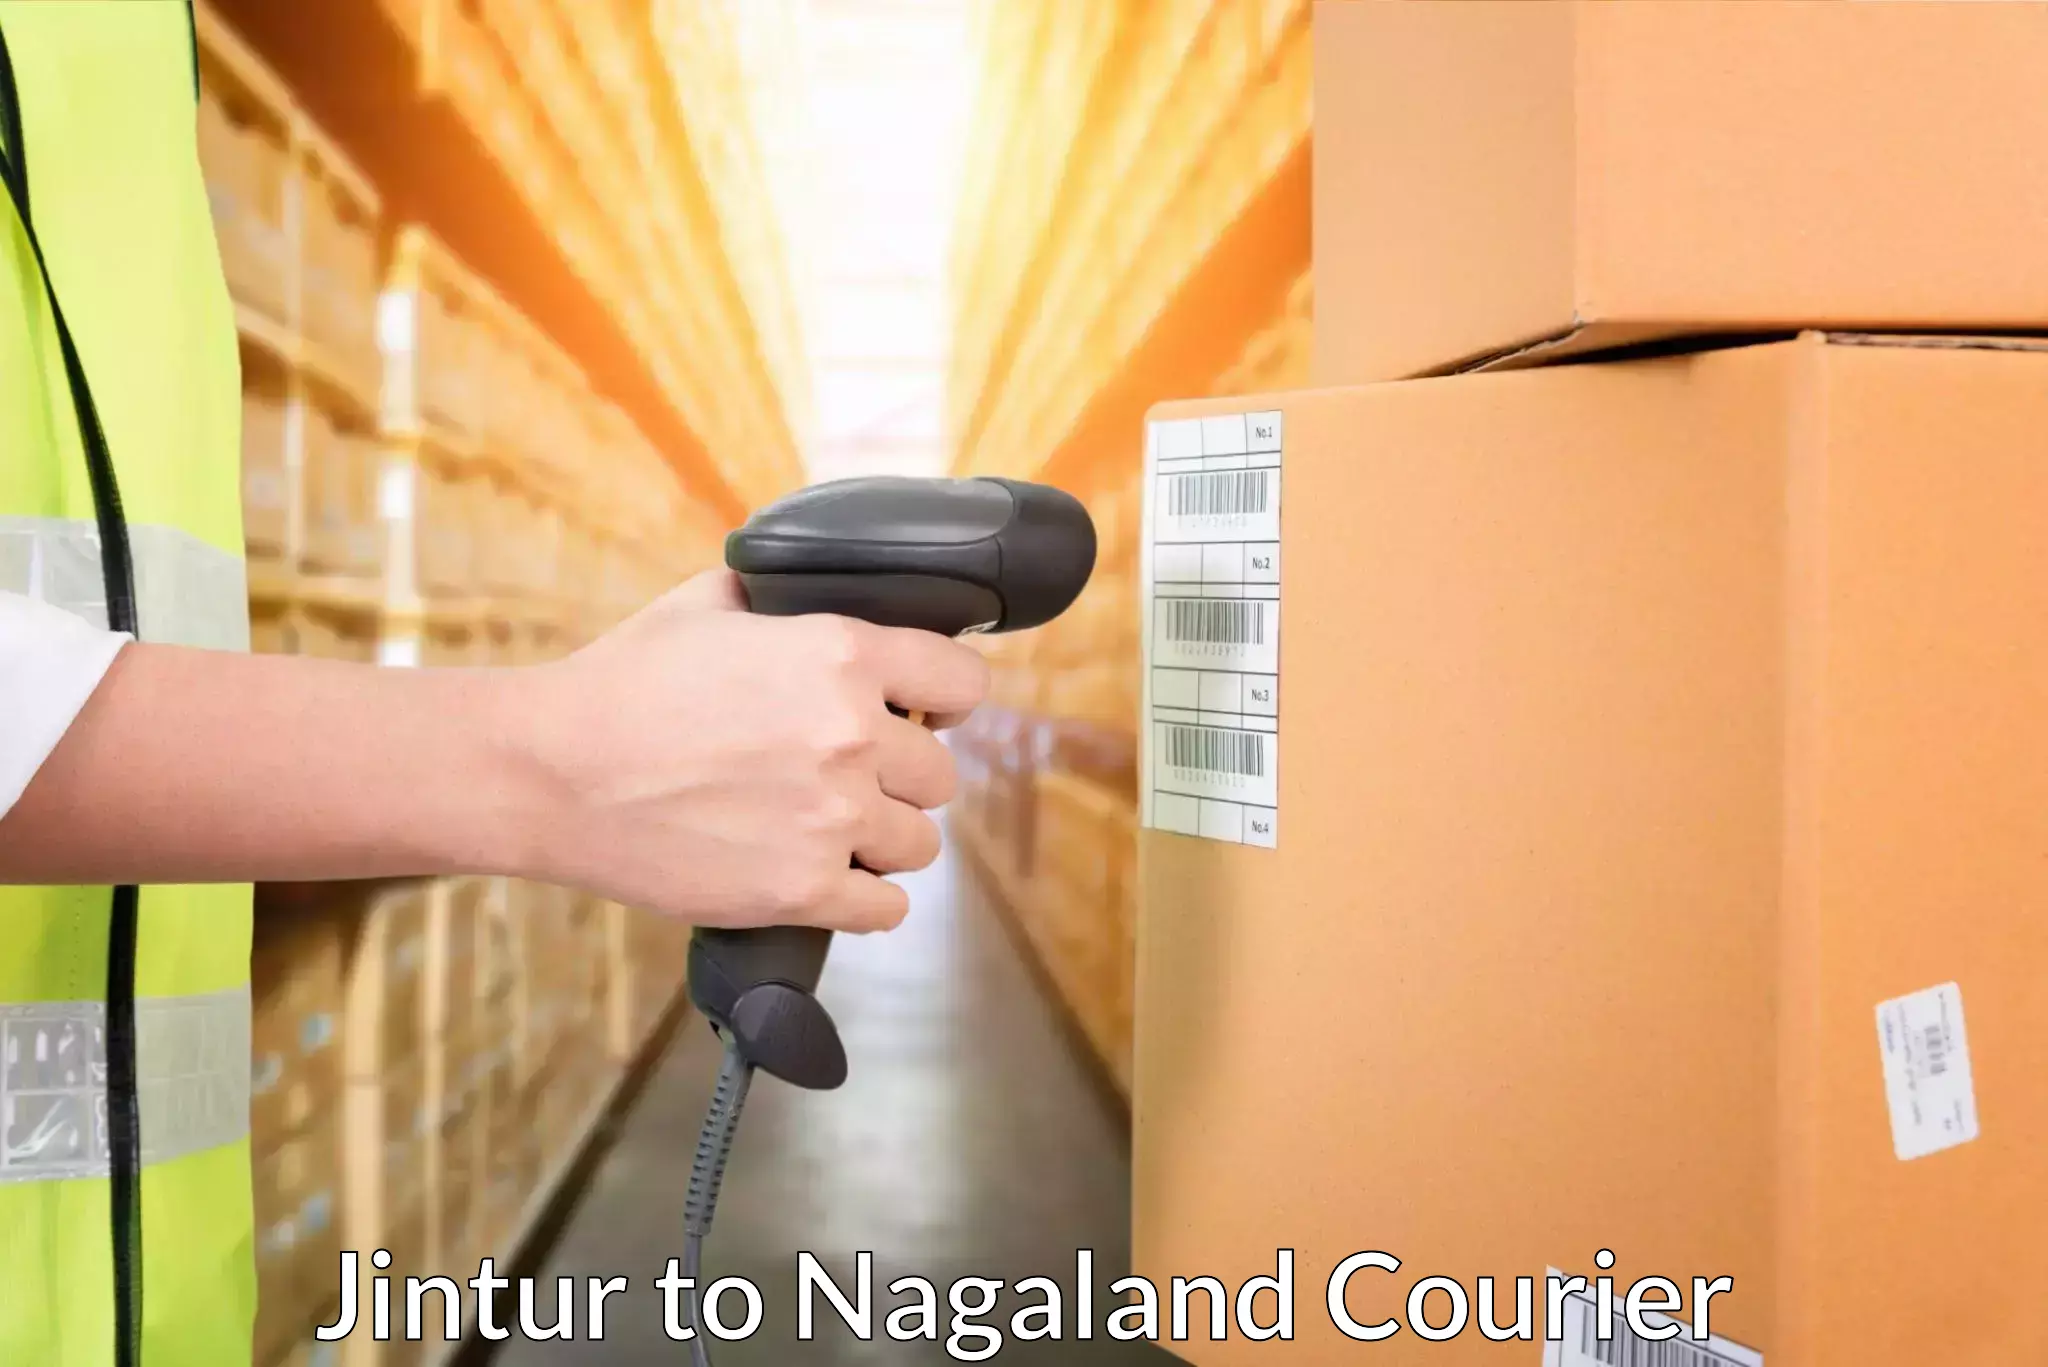 State-of-the-art courier technology Jintur to Kiphire